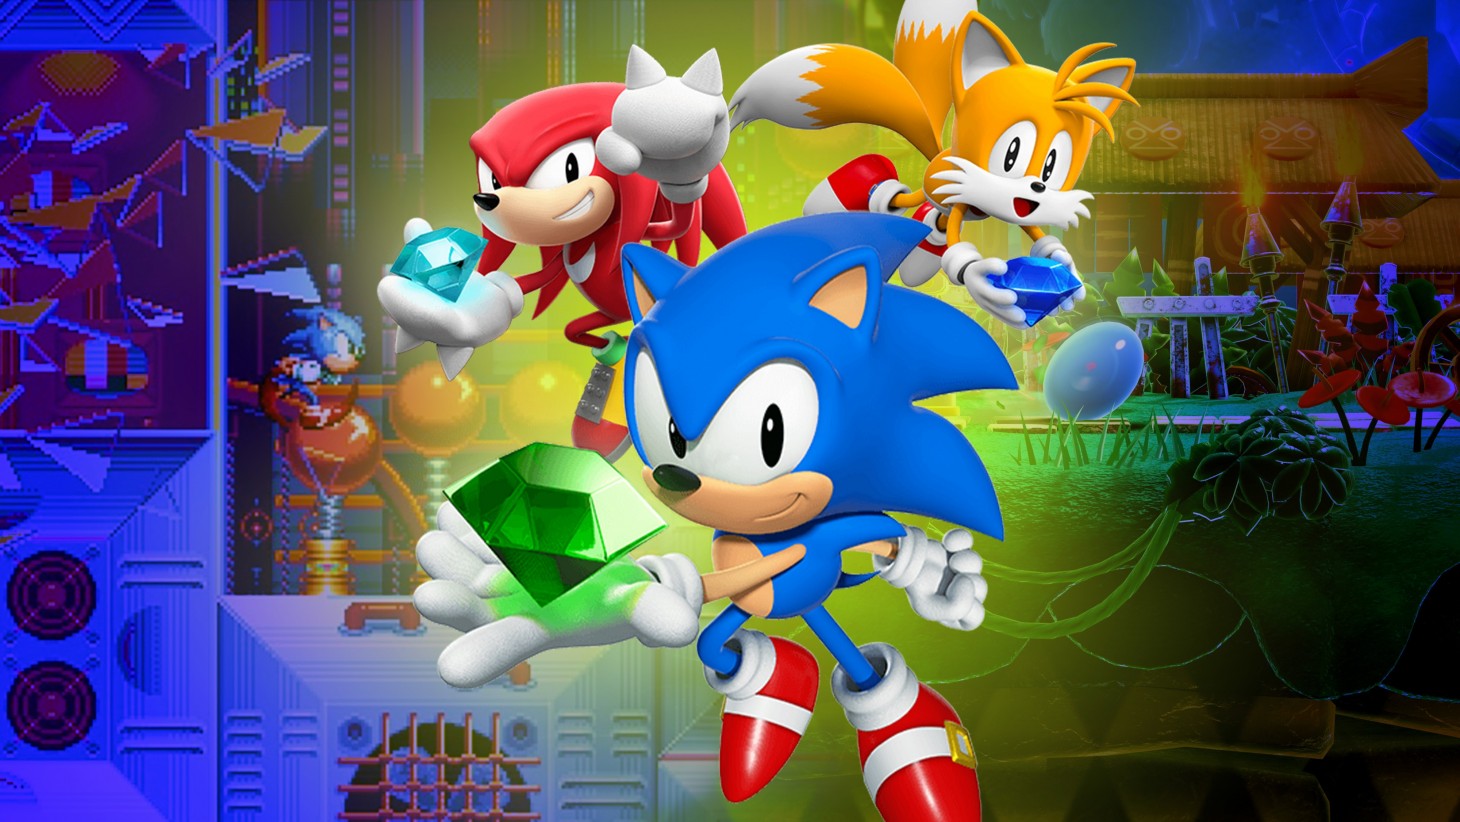 SONIC MANIA PLUS (new) - Xbox One GAMES – Back in The Game Video Games